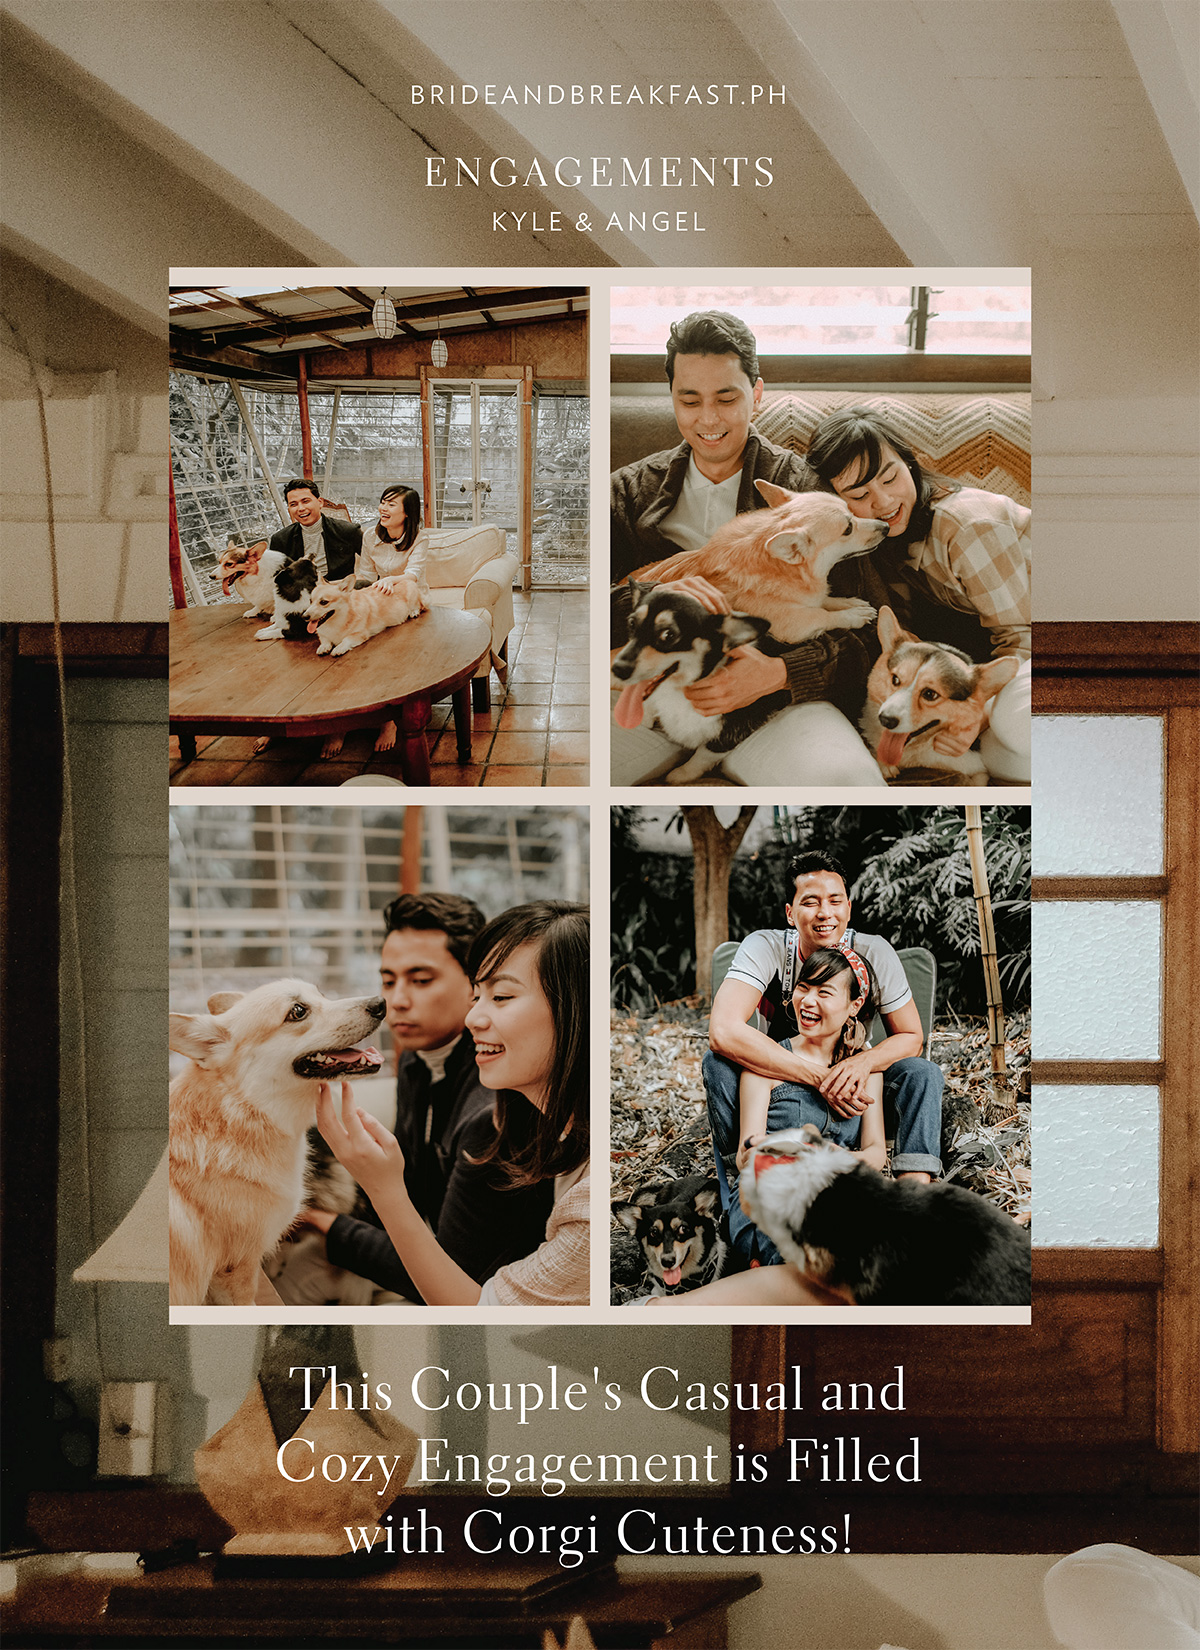 This Couple's Casual and Cozy Engagement is Filled with Corgi Cuteness!